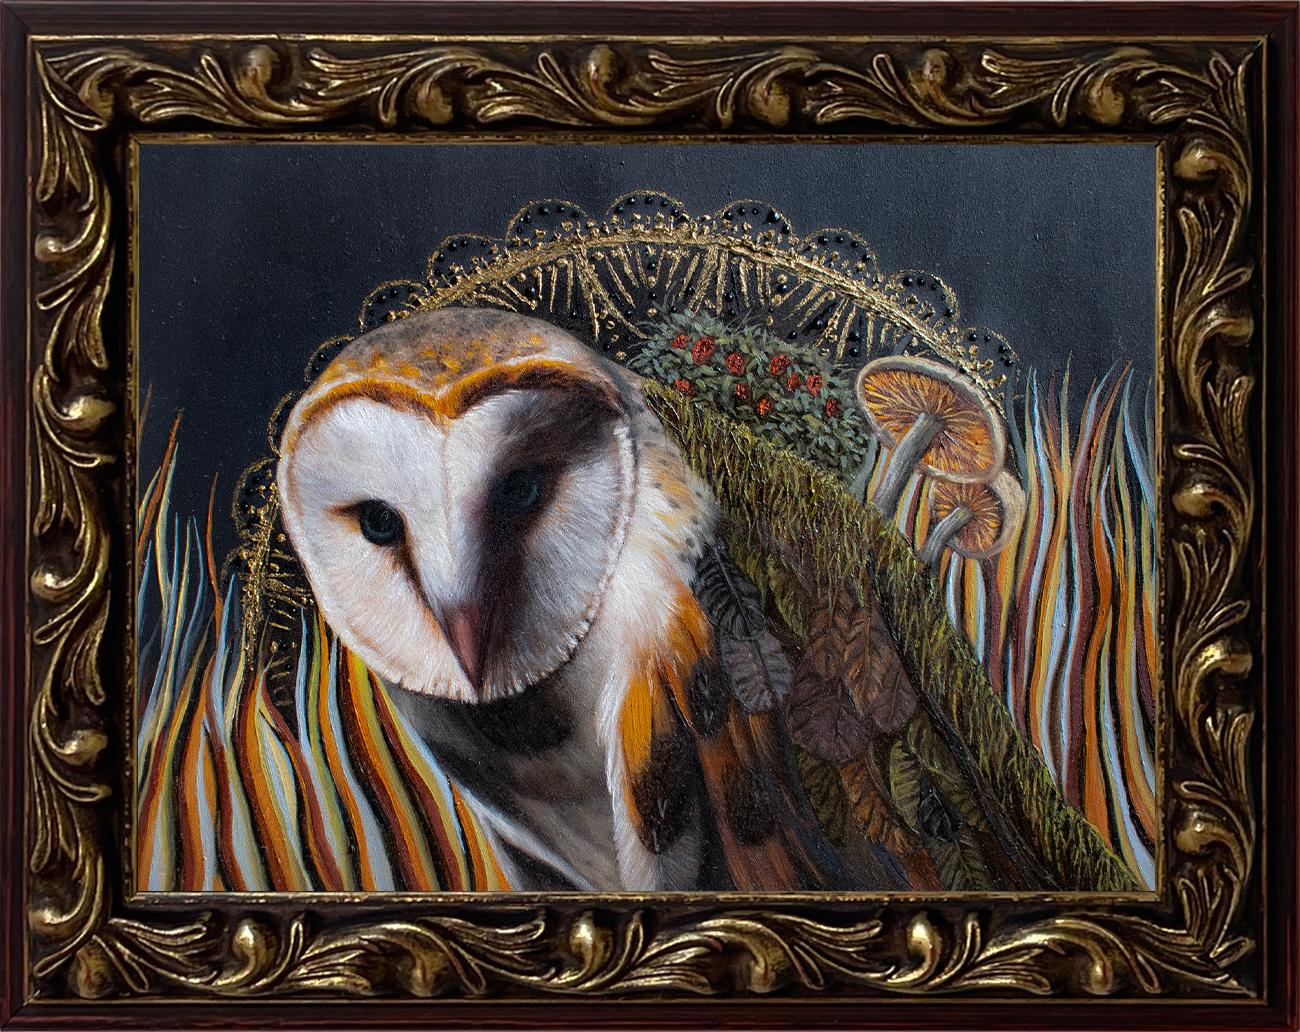 Andrada Trapnell's "Dream Catcher" is a captivating original artwork created in 2023. This piece measures 6 x 8 x 0.10 inches (15.24 x 20.32 x 0.25 cm) and features a masterful blend of oil on board. The painting portrays a striking barn owl with